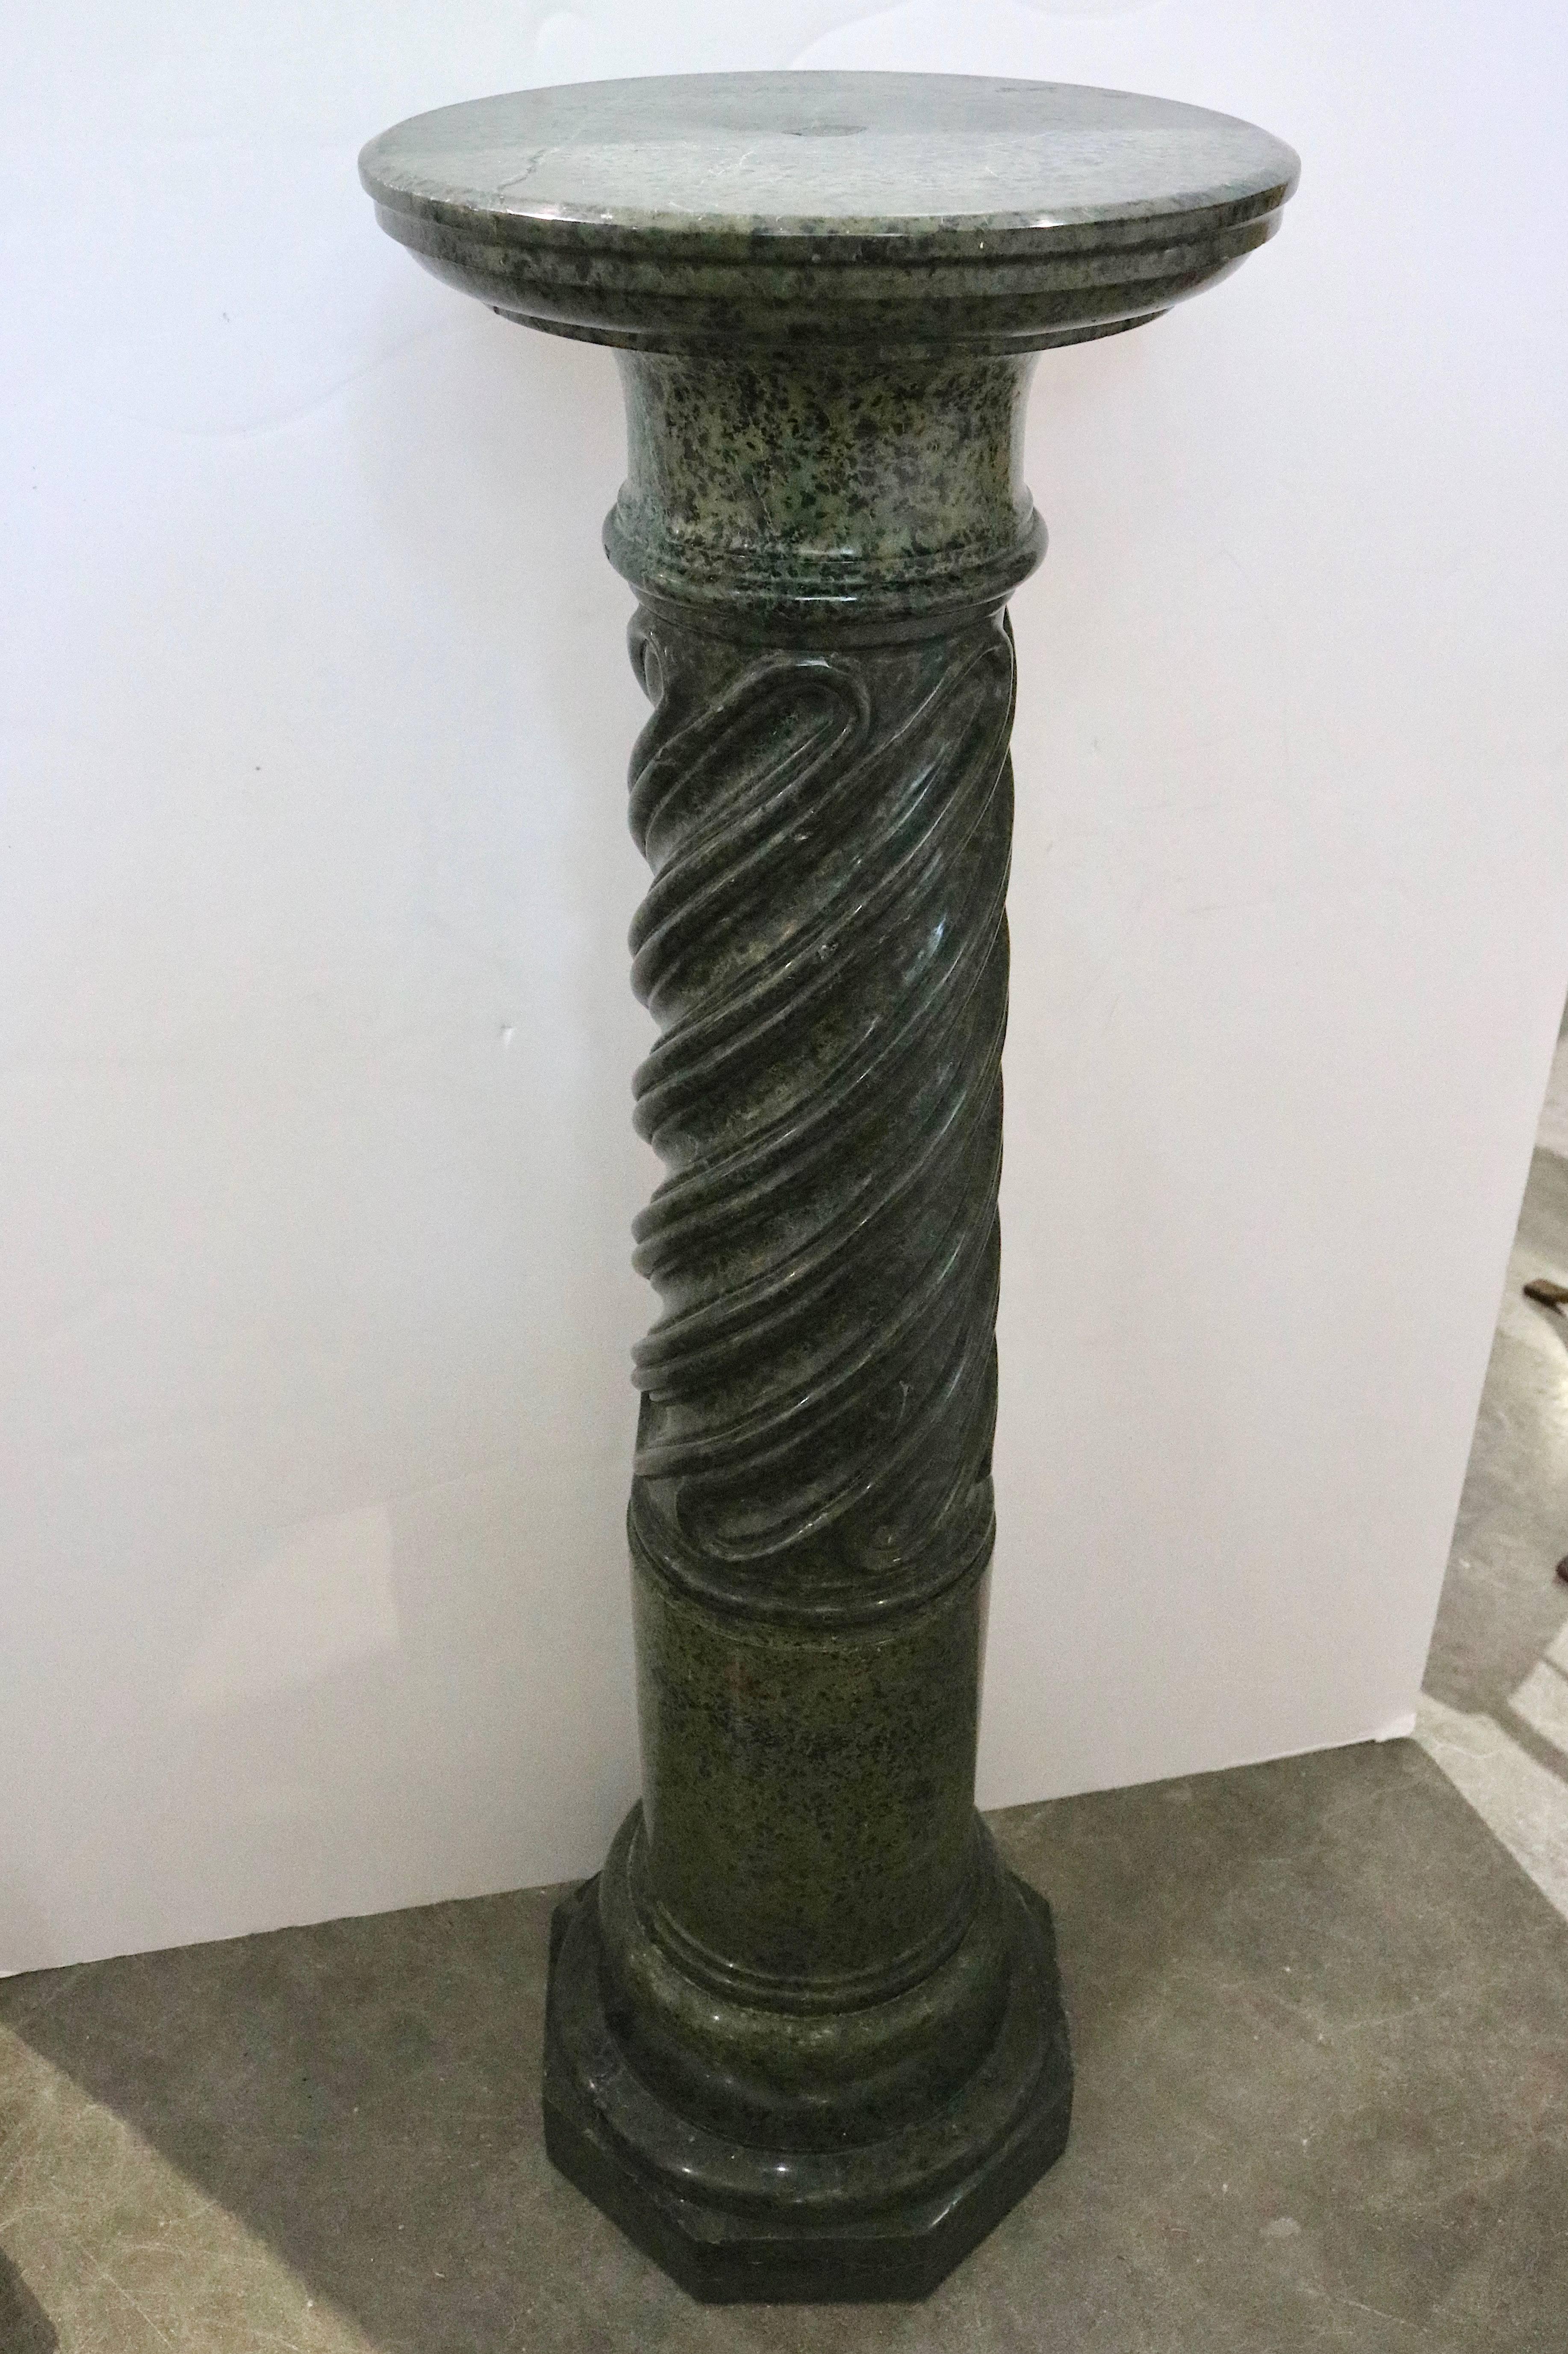 This stylish pedestal in very much in the Italian Renaissance style and is fabricated in three sections. 

For best net trade price or additional questions regarding this item, please click the 